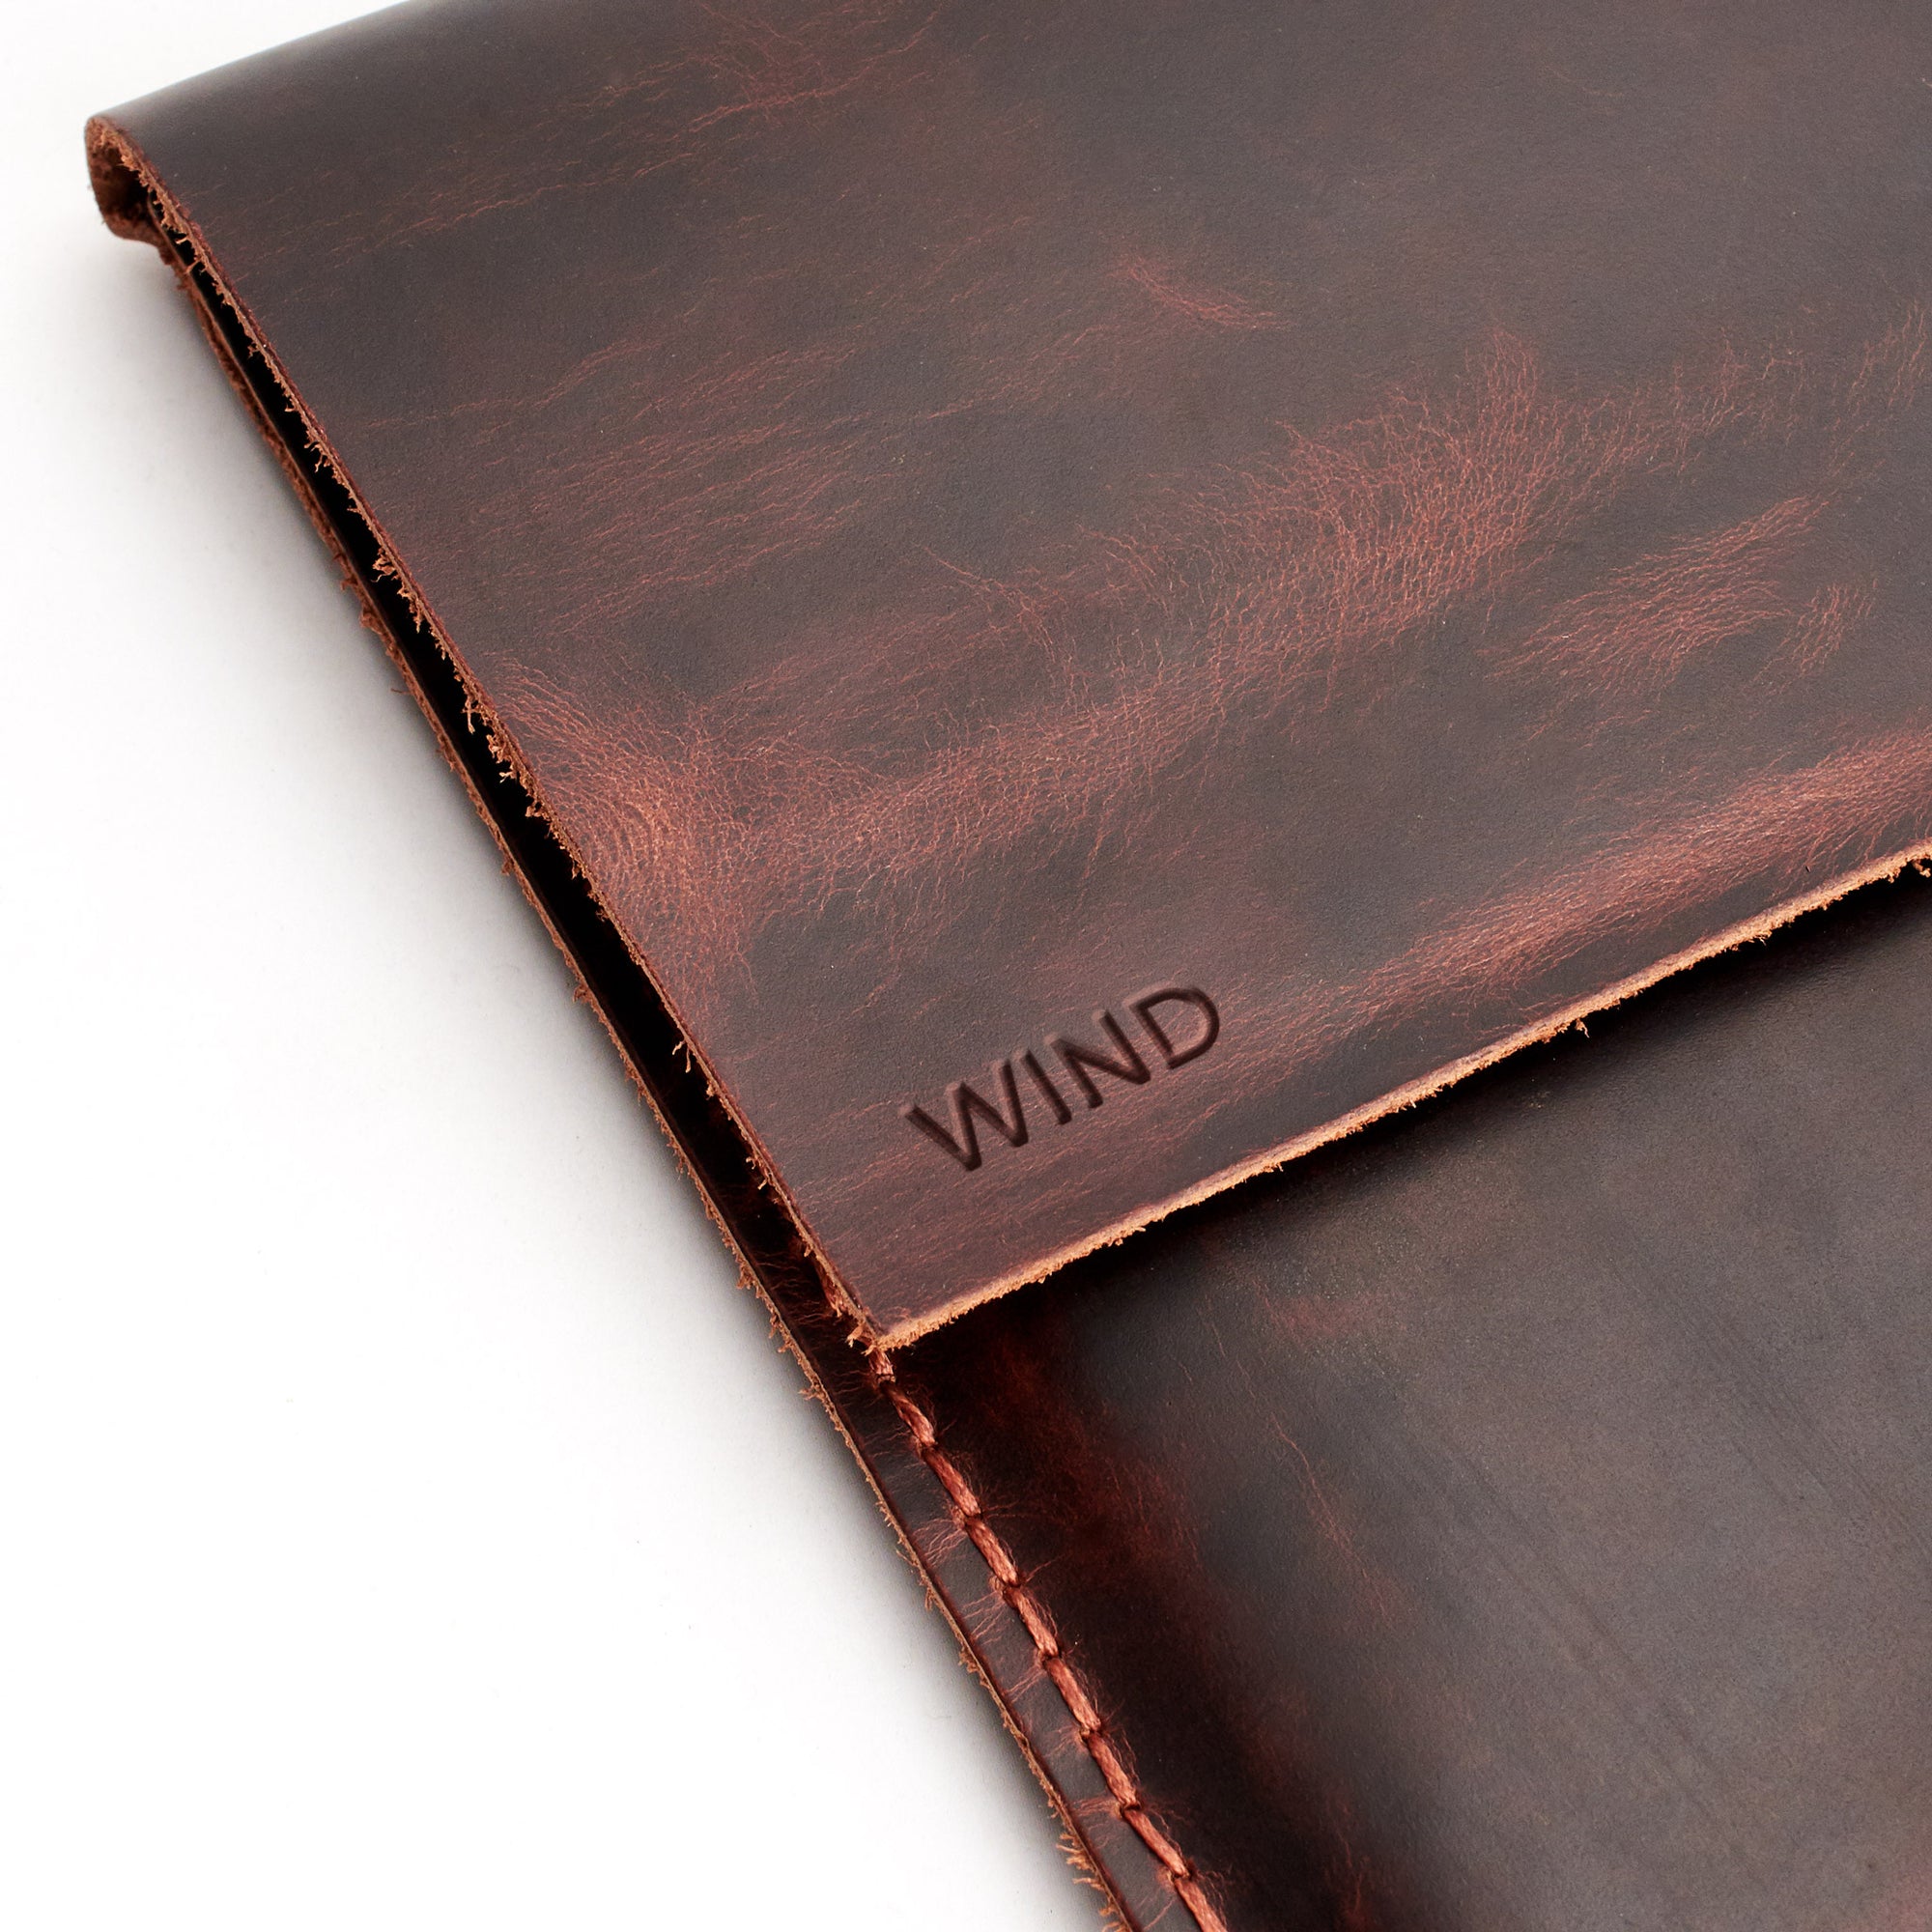 Custom engraving. Leather Lenovo Yoga red brown Sleeve Case by Capra Leather